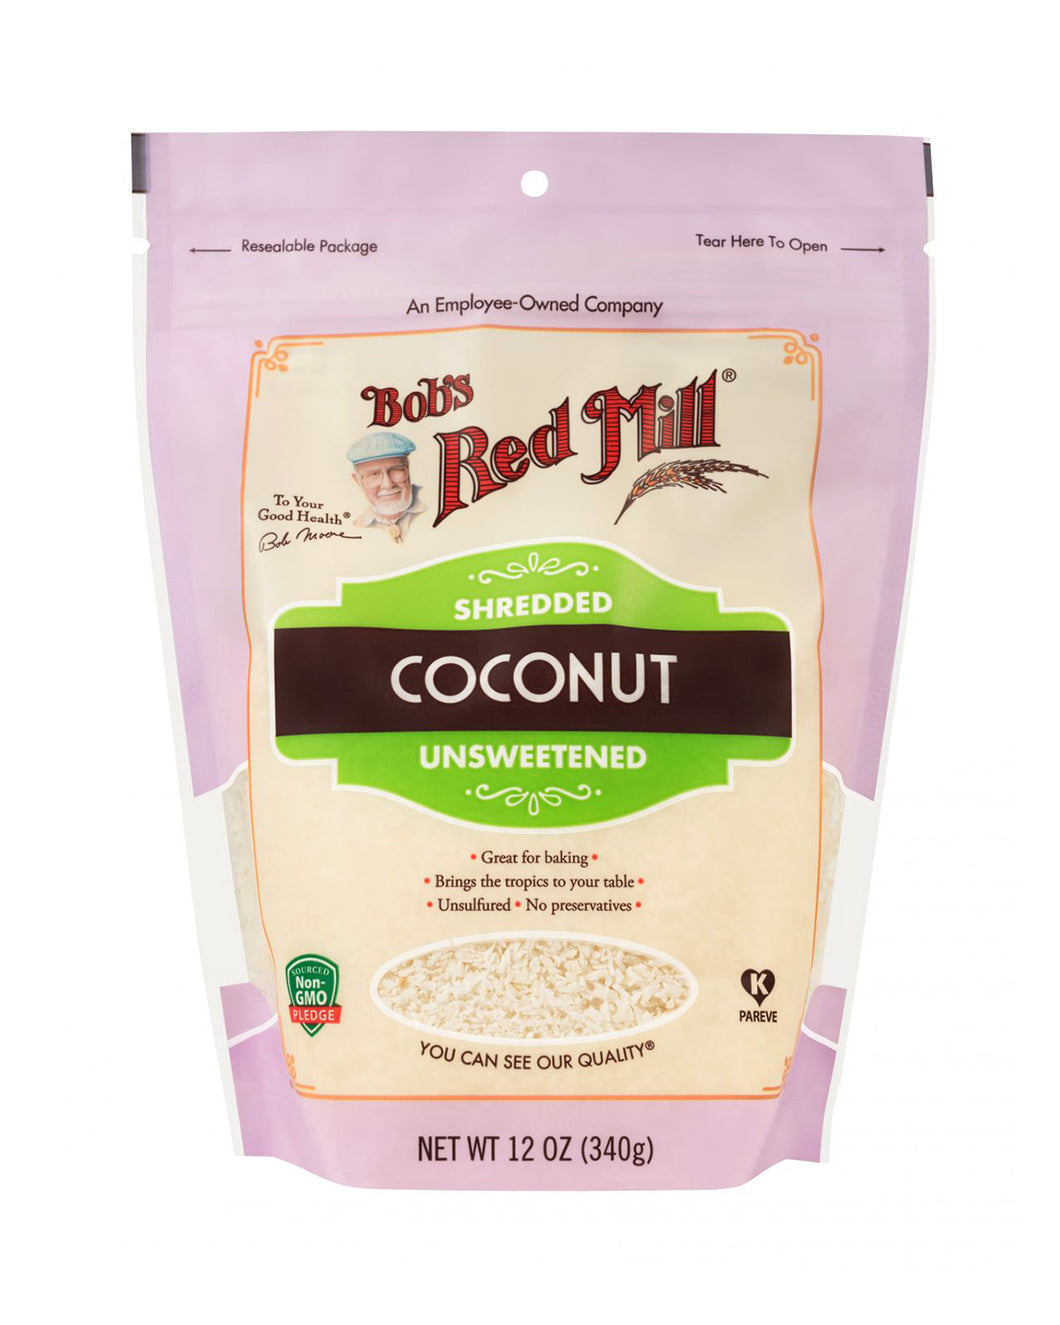 Shredded Coconut Unsweetened by Bob's Red Mill, 12 oz